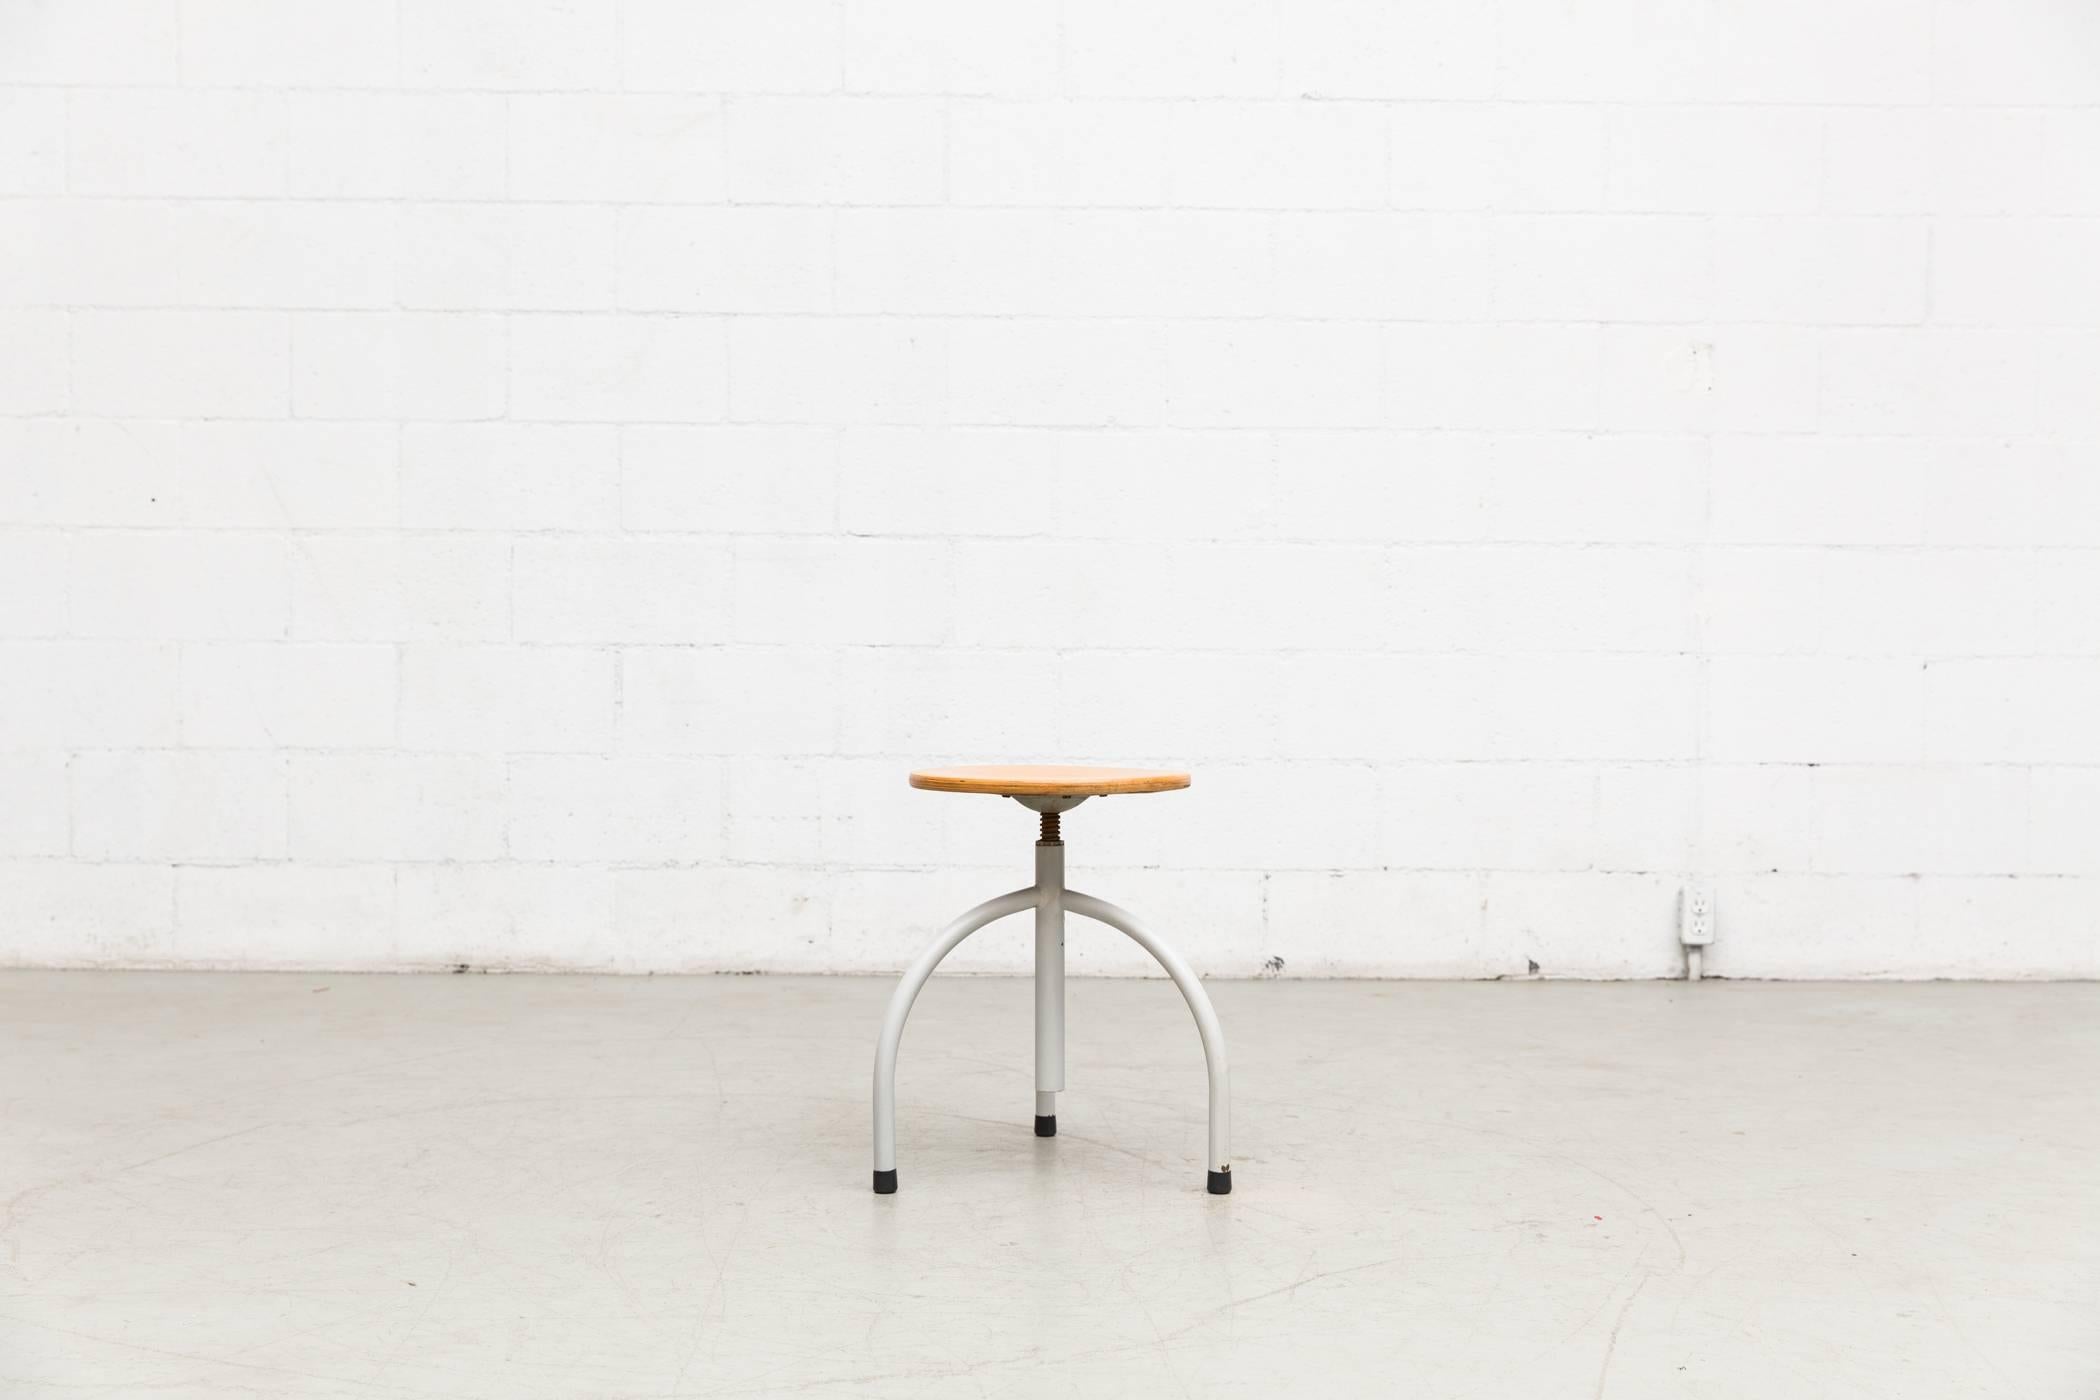 Tubular steel with 13.5" birch wood seat, adjustable height from Oosterwolde for University of Nijmegen. Both in original condition, Visible wear to the enamel and wood top. Set price.